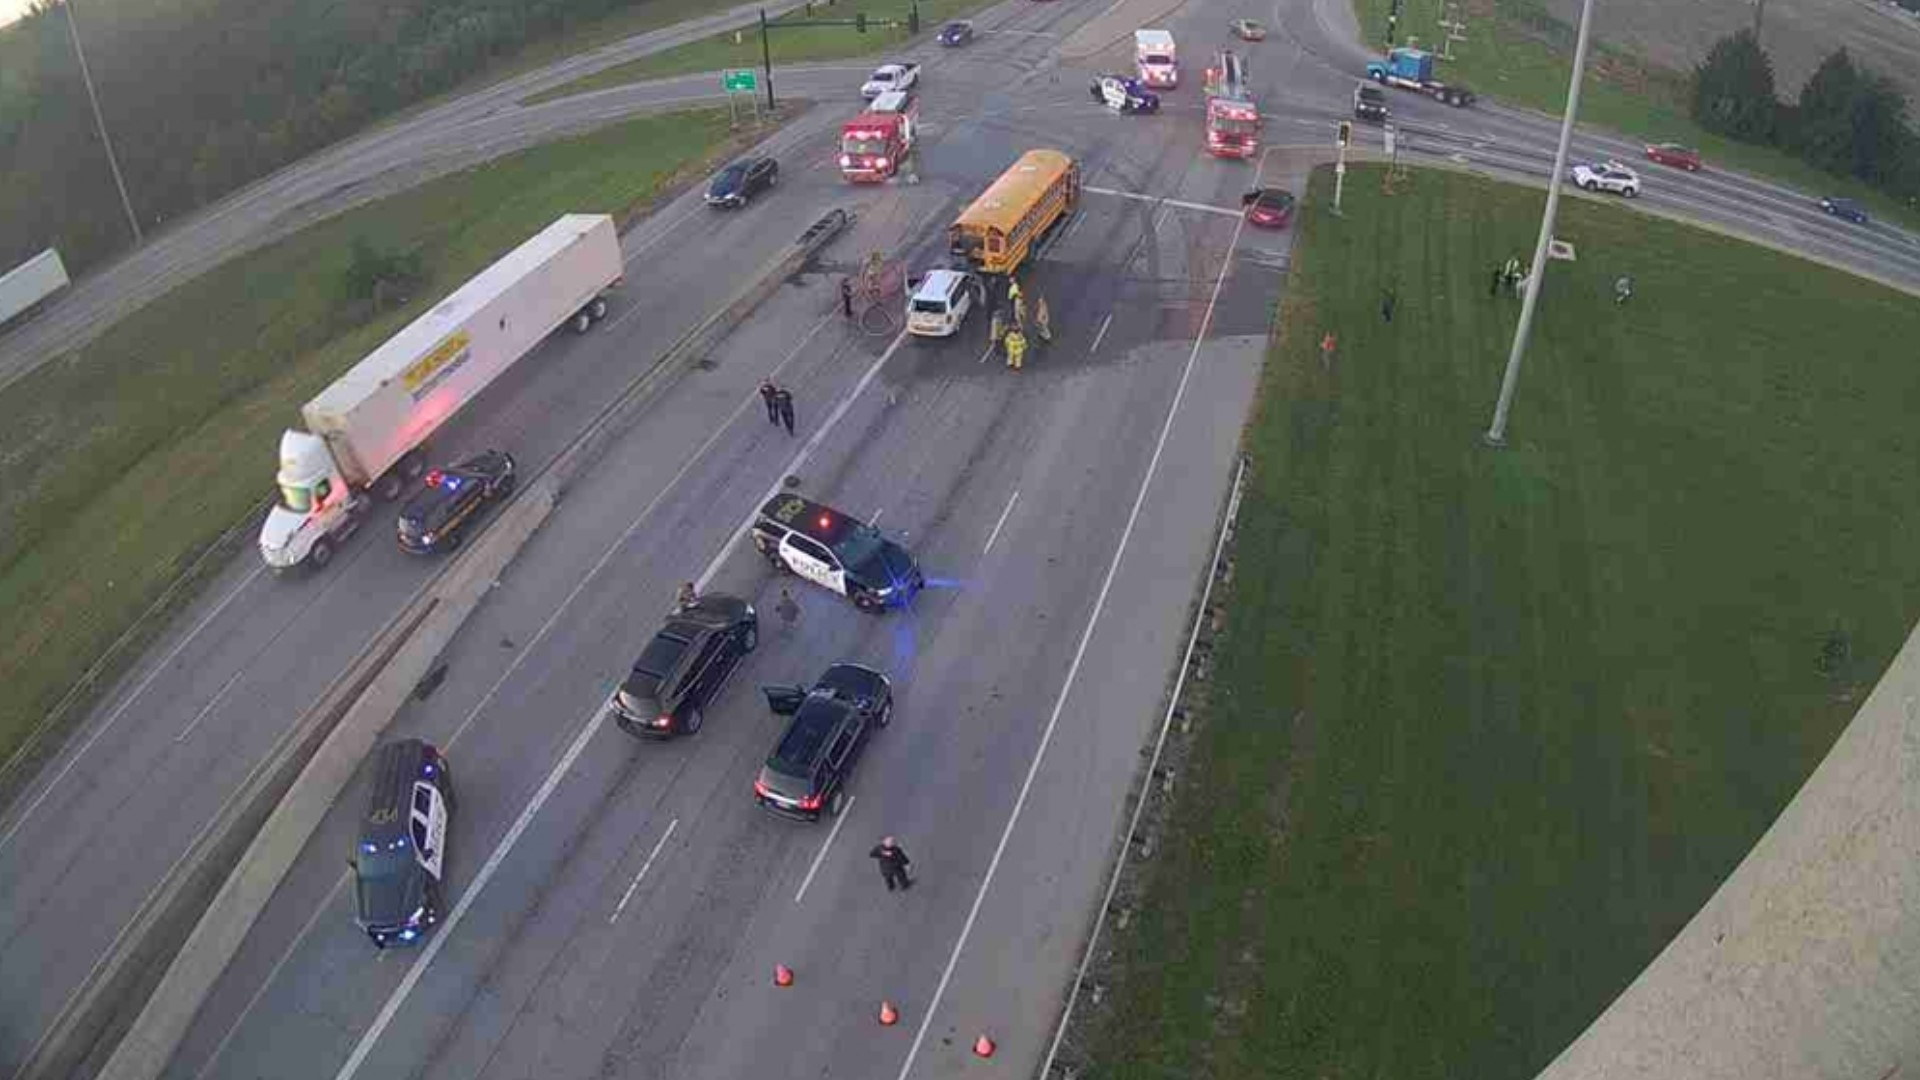 The Franklin County Sheriff’s Office said the crash happened around 6:45 a.m. at Alum Creek Drive and Groveport Road near Interstate 270.